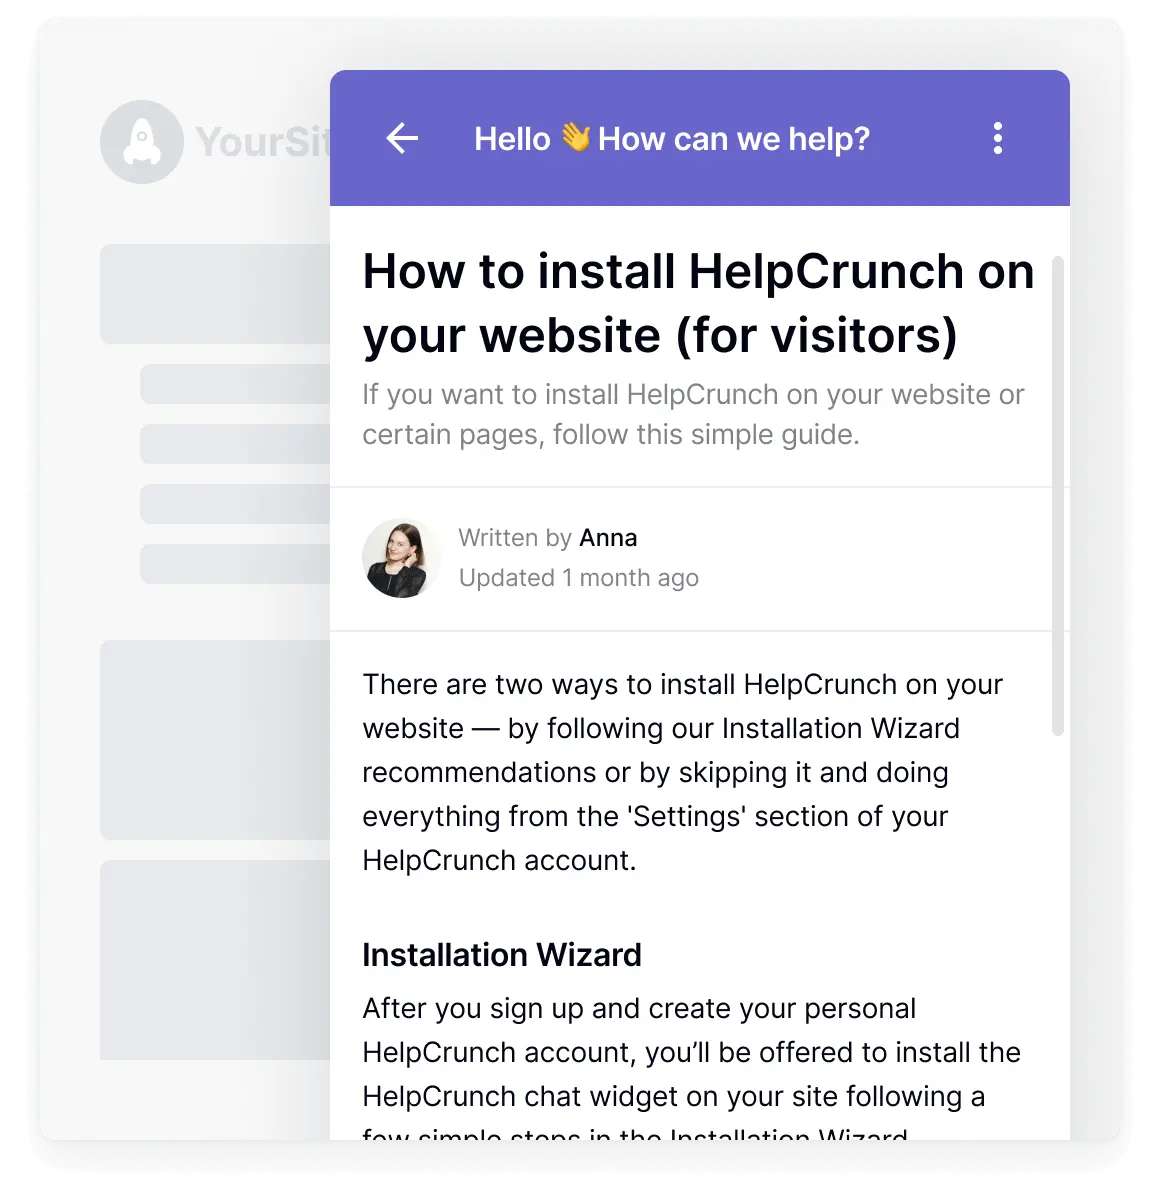 Knowledge base article in the HelpCrunch chat widget